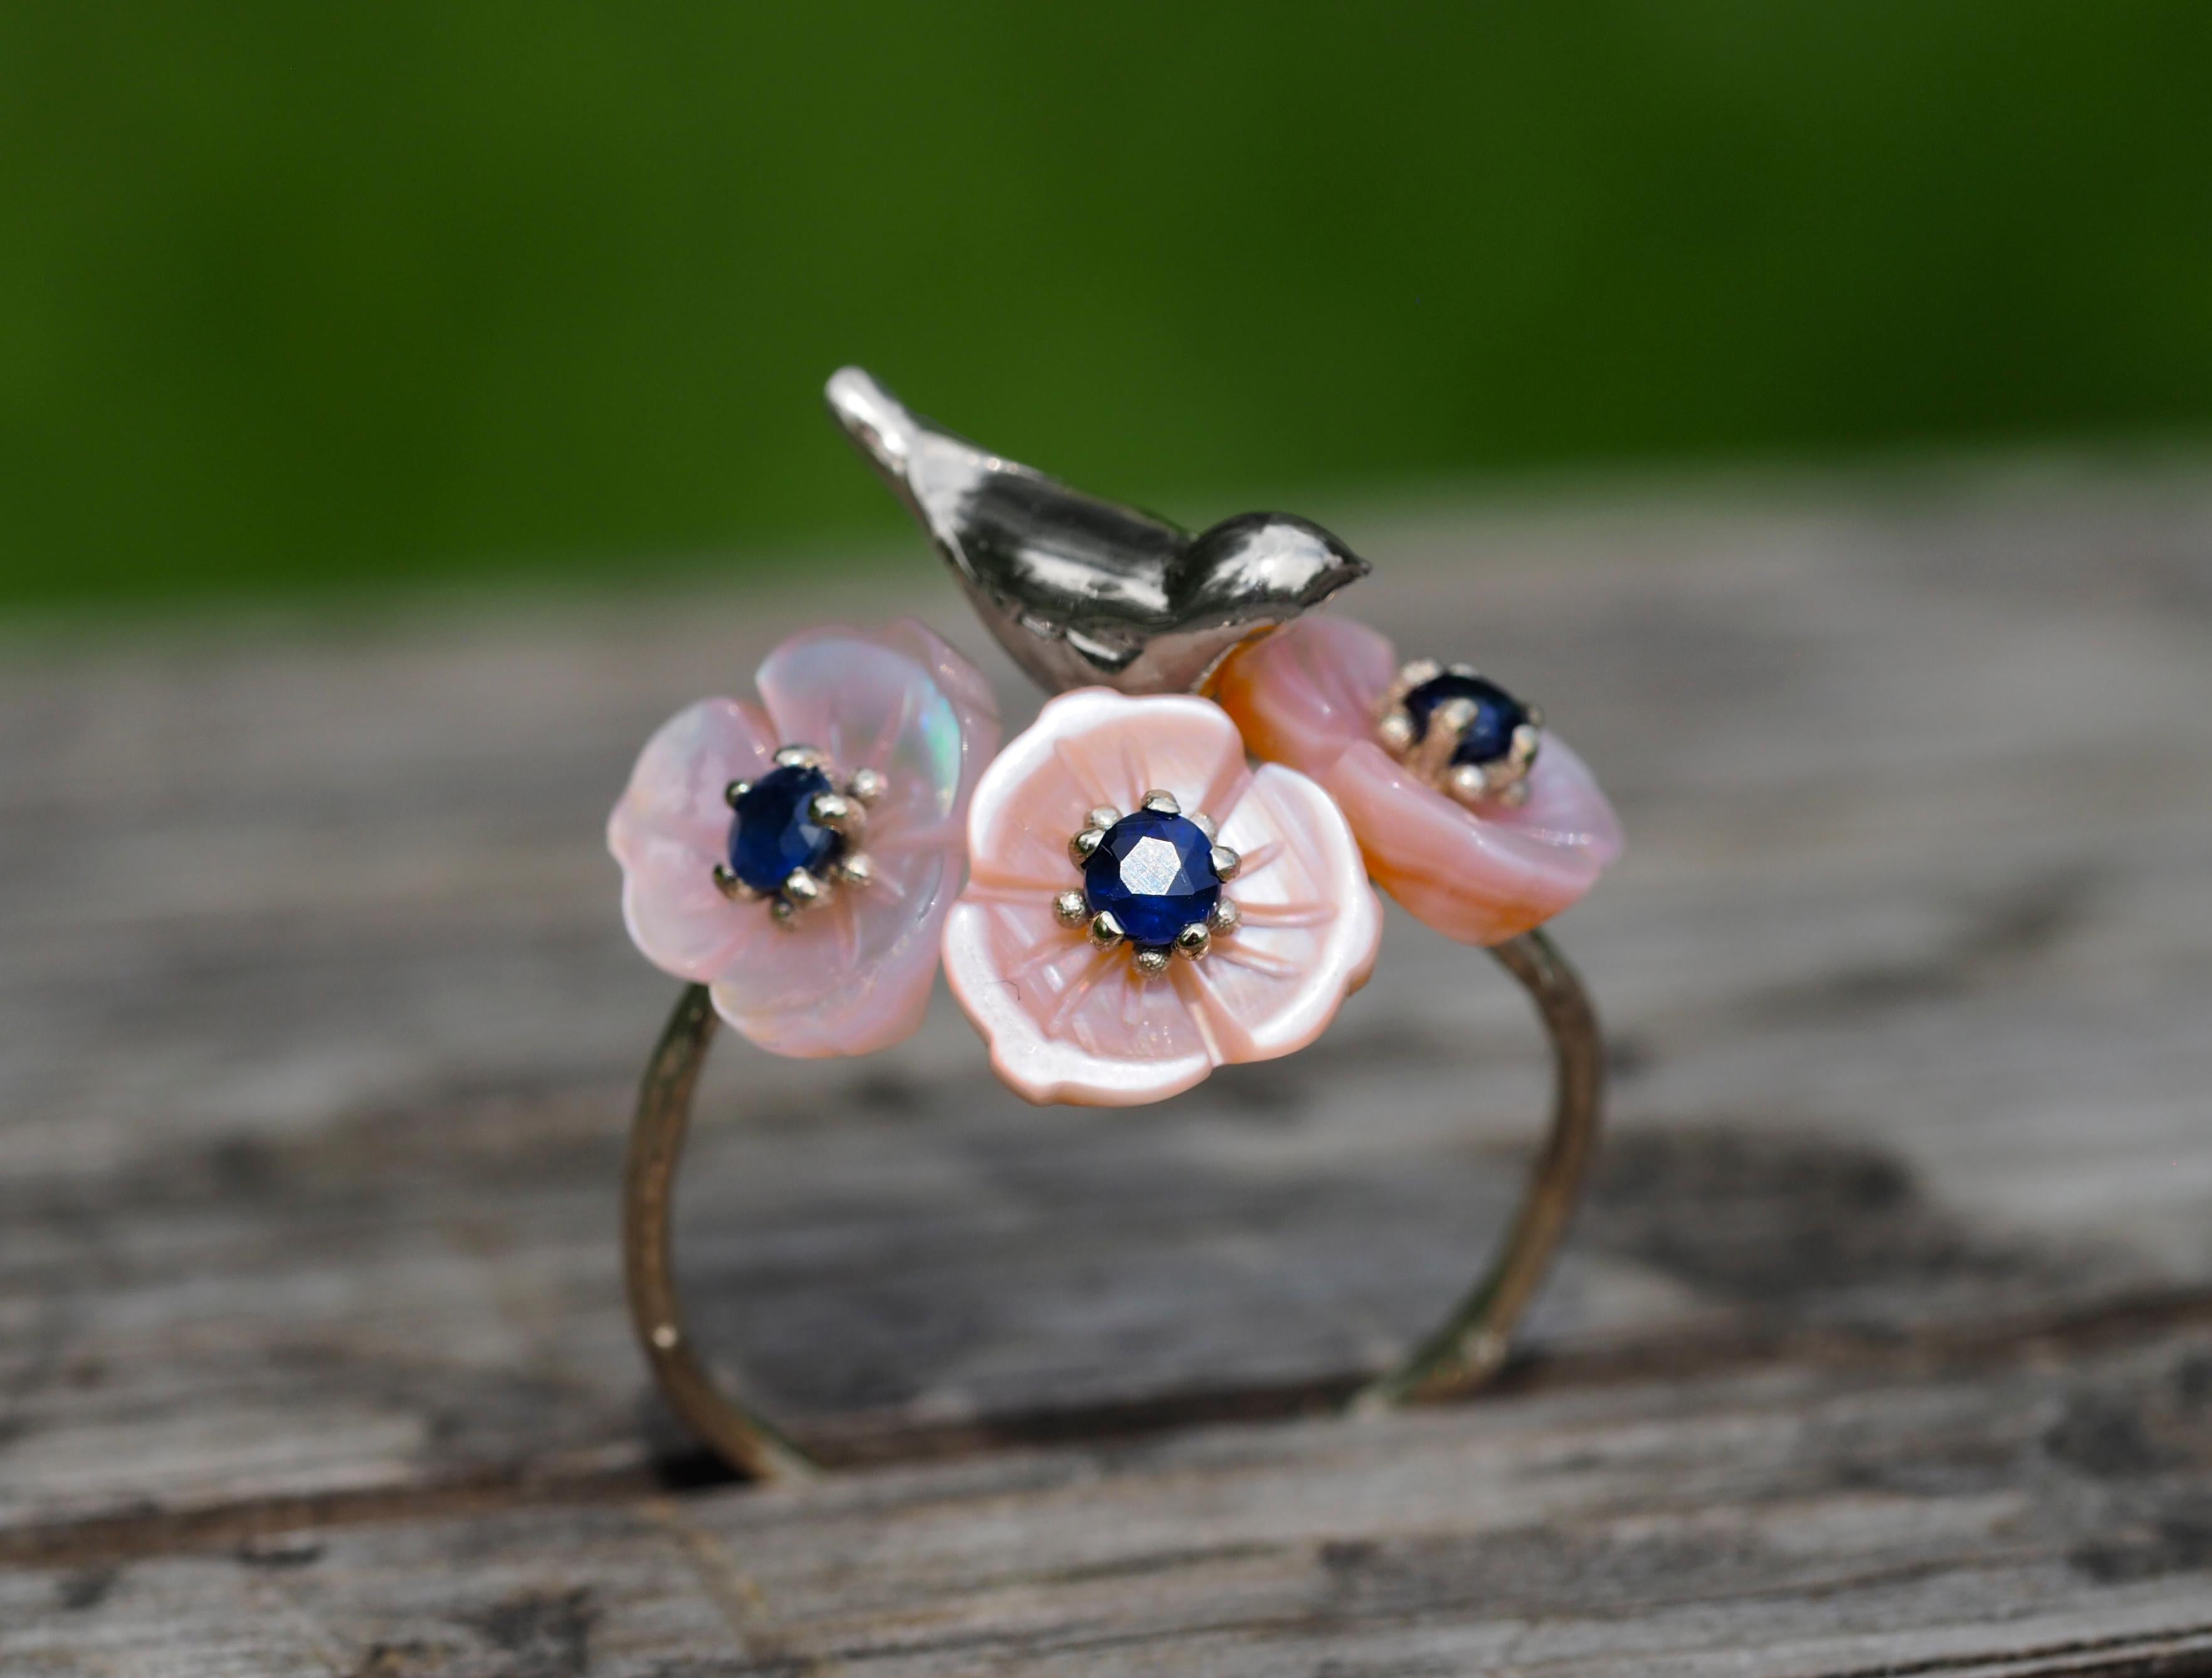 14k Gold Bird on Branch Ring with Sapphires and Carved Mother of Pearl Flowers 1